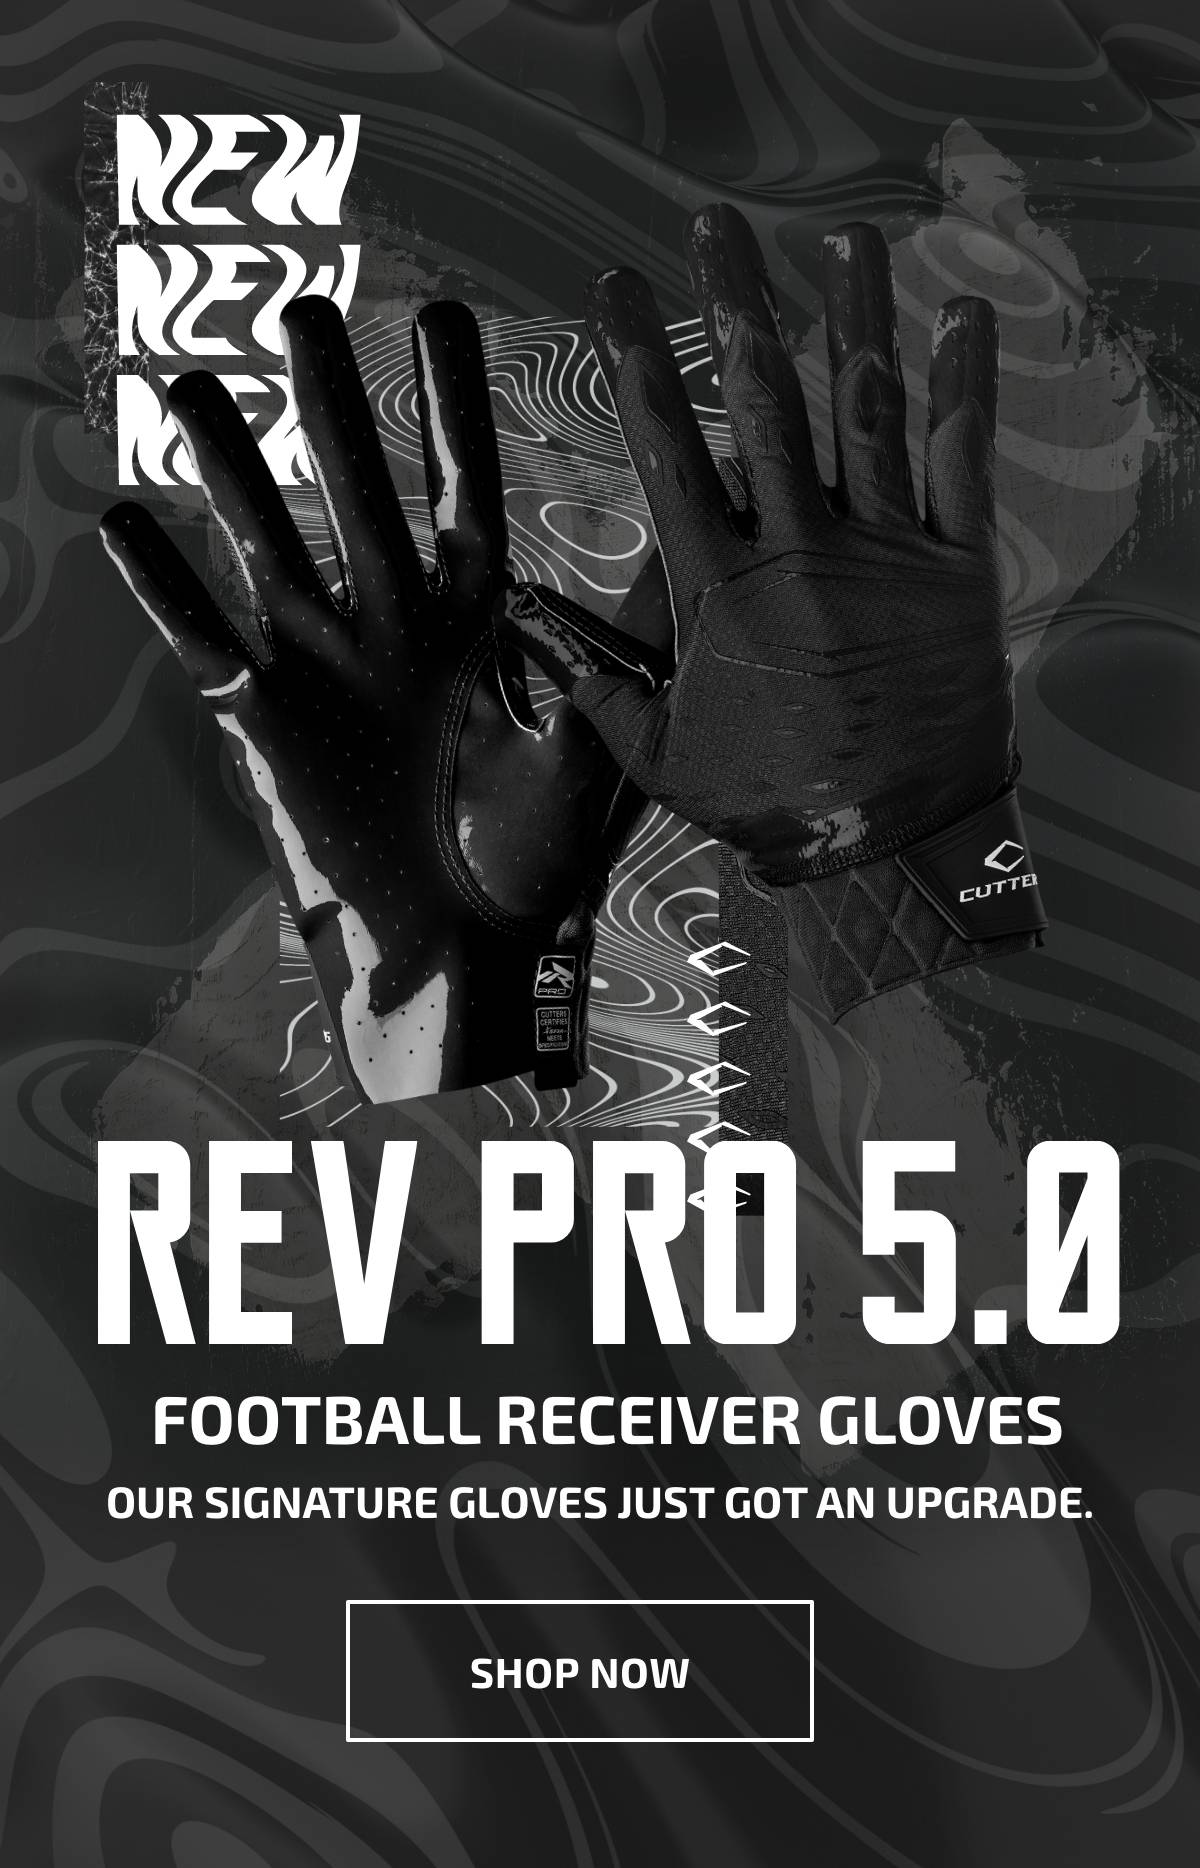 Rev Pro 5.0 Football Receiver Gloves. Our signature gloves just got an upgrade. SHOP. NOW